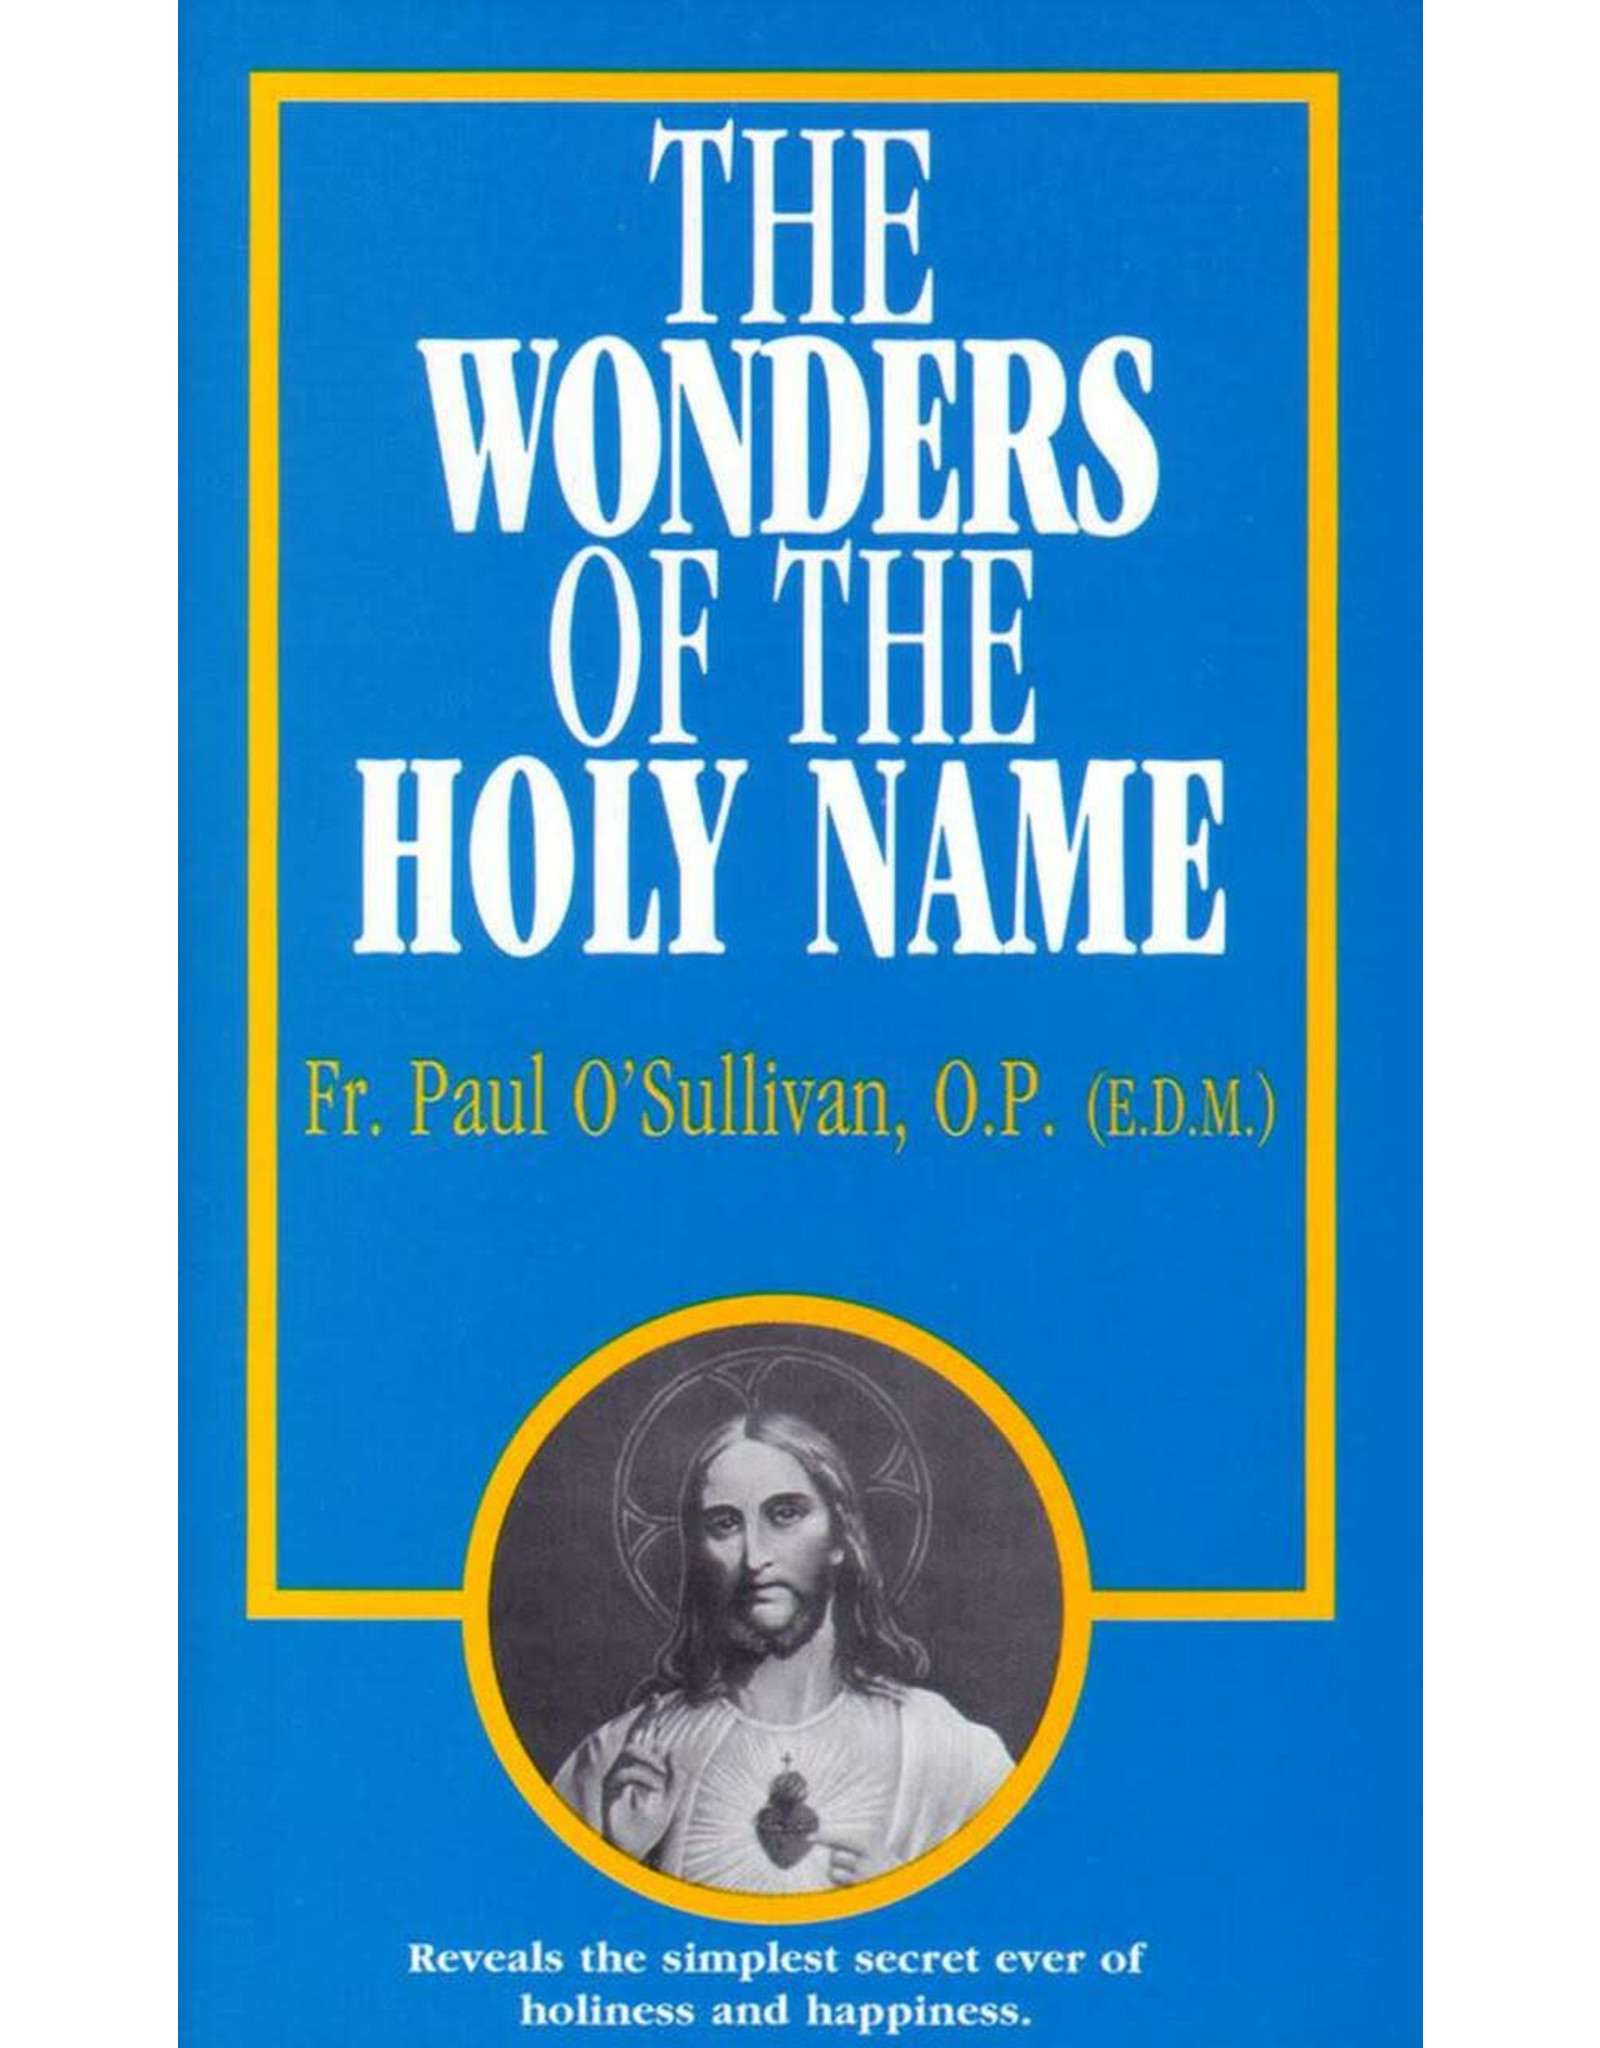 Tan Wonders of the Holy Name